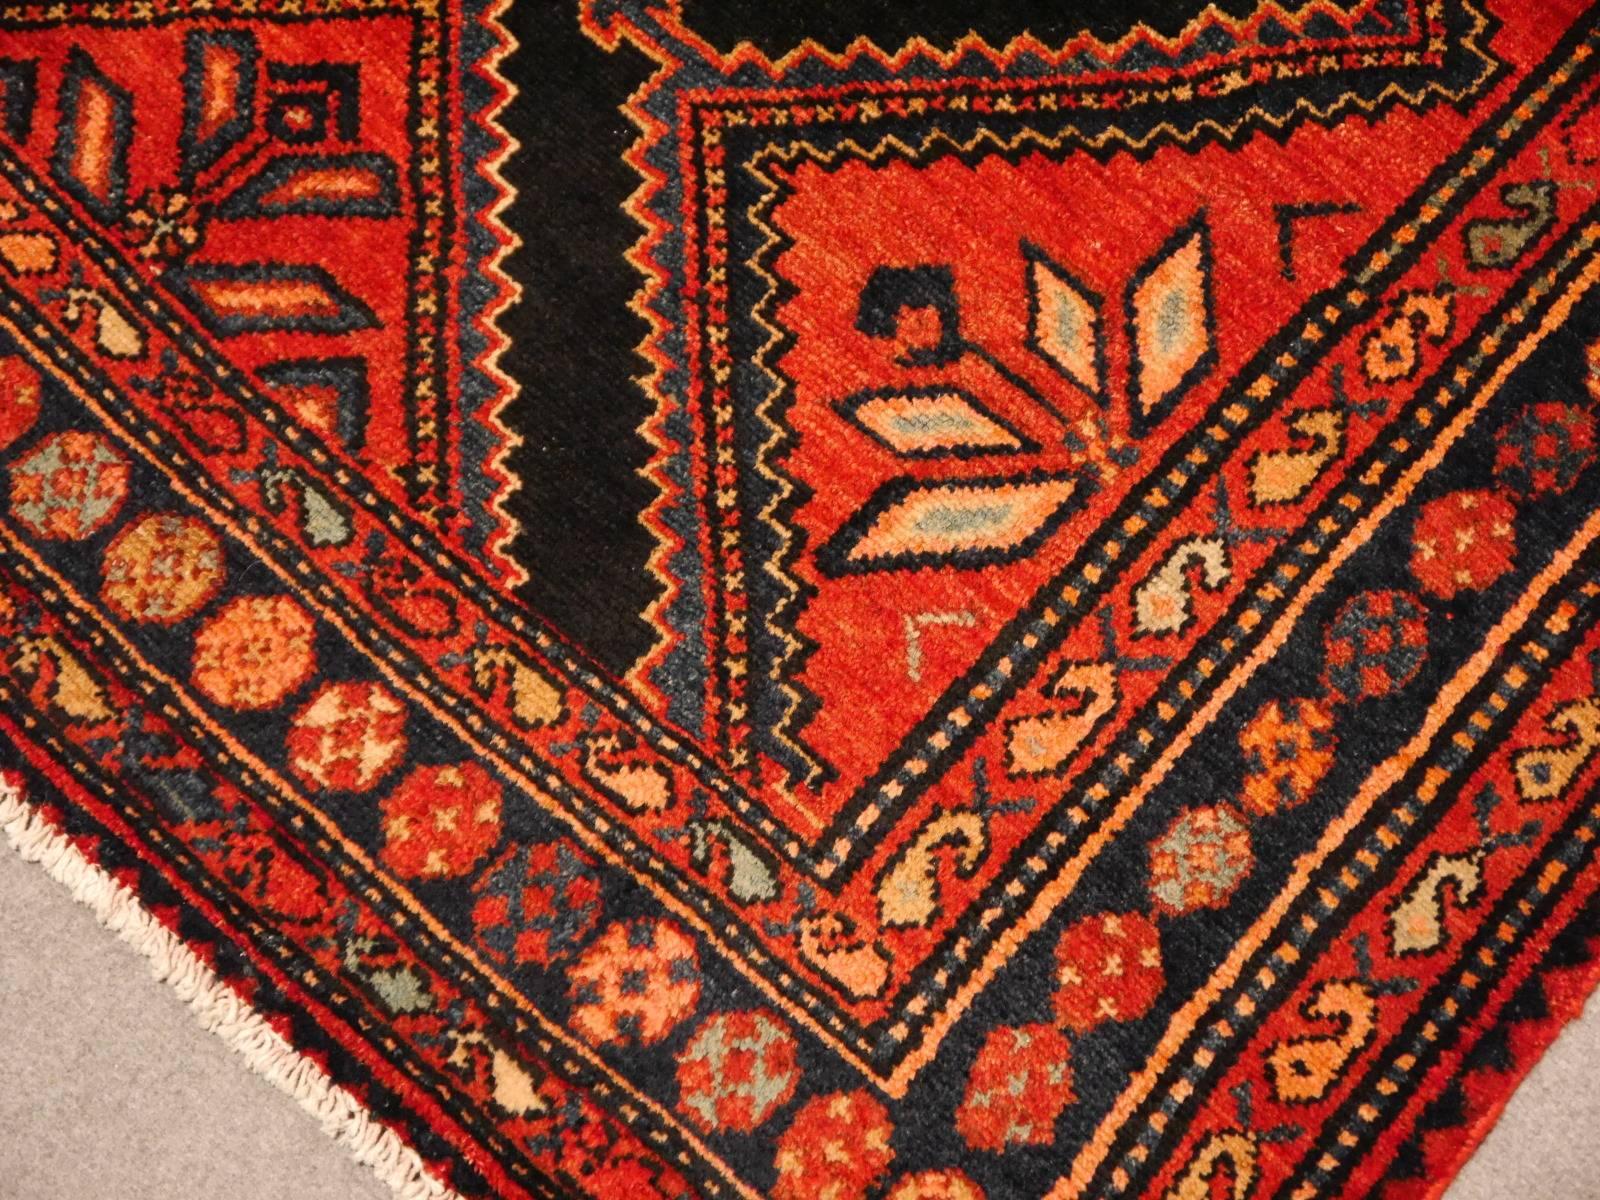 Beautiful hand-knotted vintage rug. The pile is made of fine, hand spun wool that was dyed with vegetable dyes. The rug is in very good condition.